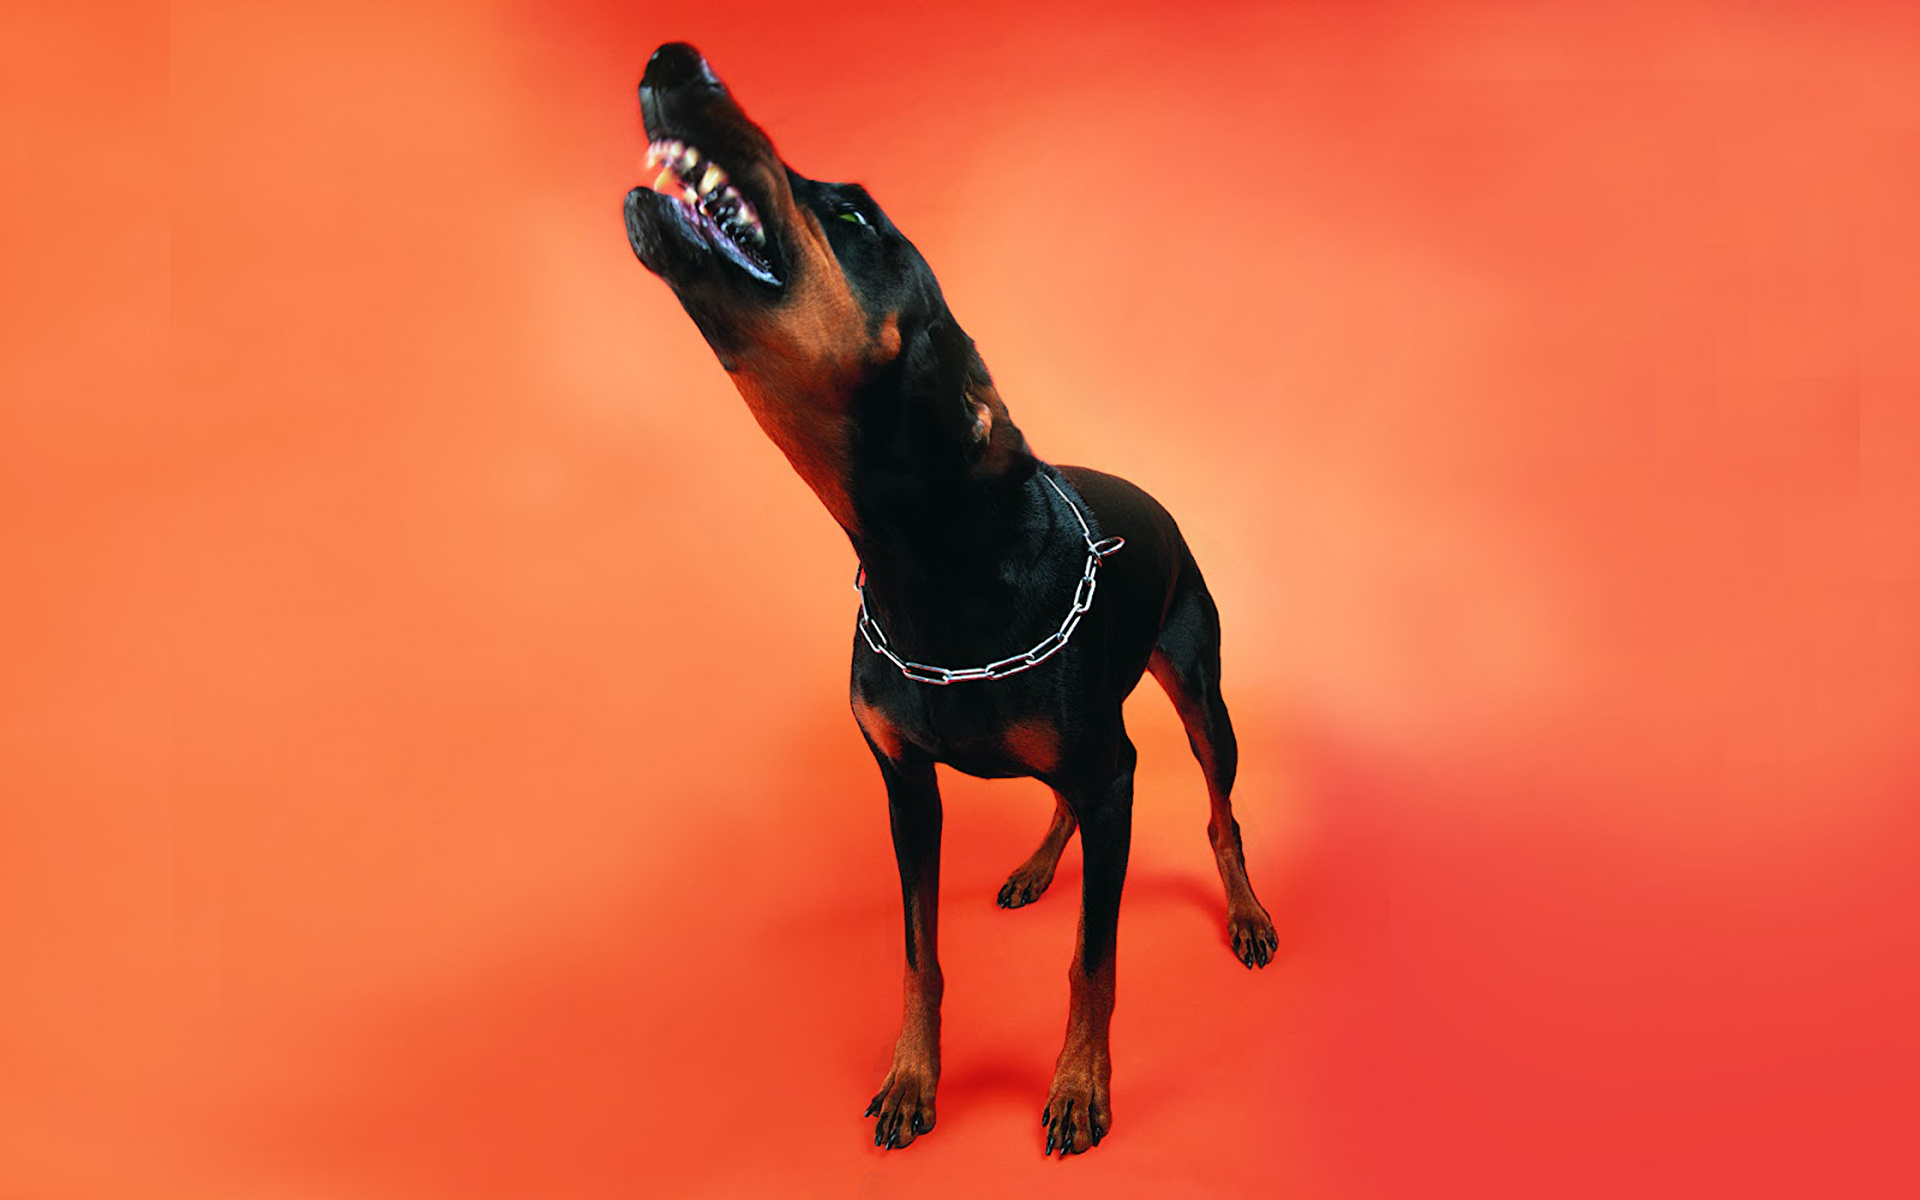 210 Angry Doberman Pinscher Stock Photos Pictures  RoyaltyFree Images   iStock